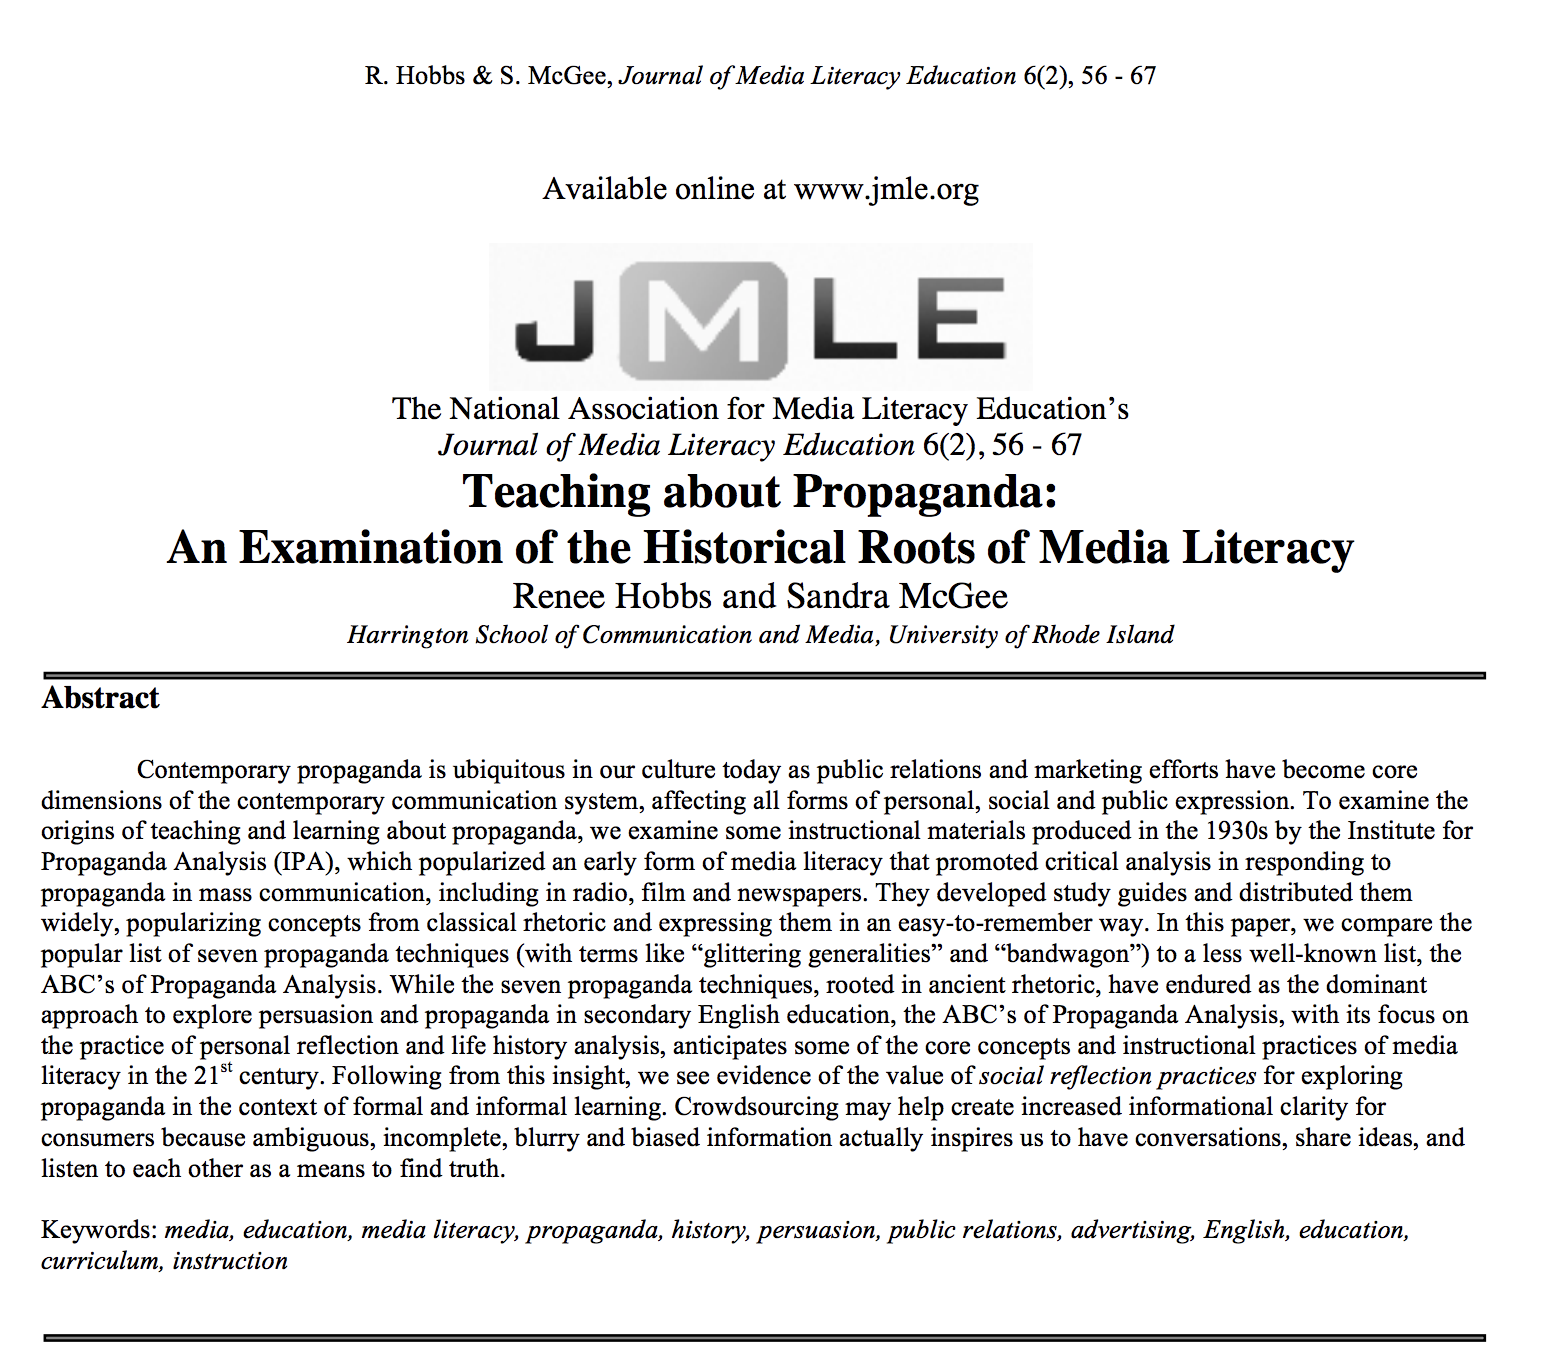 Teaching About Propaganda: An Examination of the Historical Roots of Media Literacy